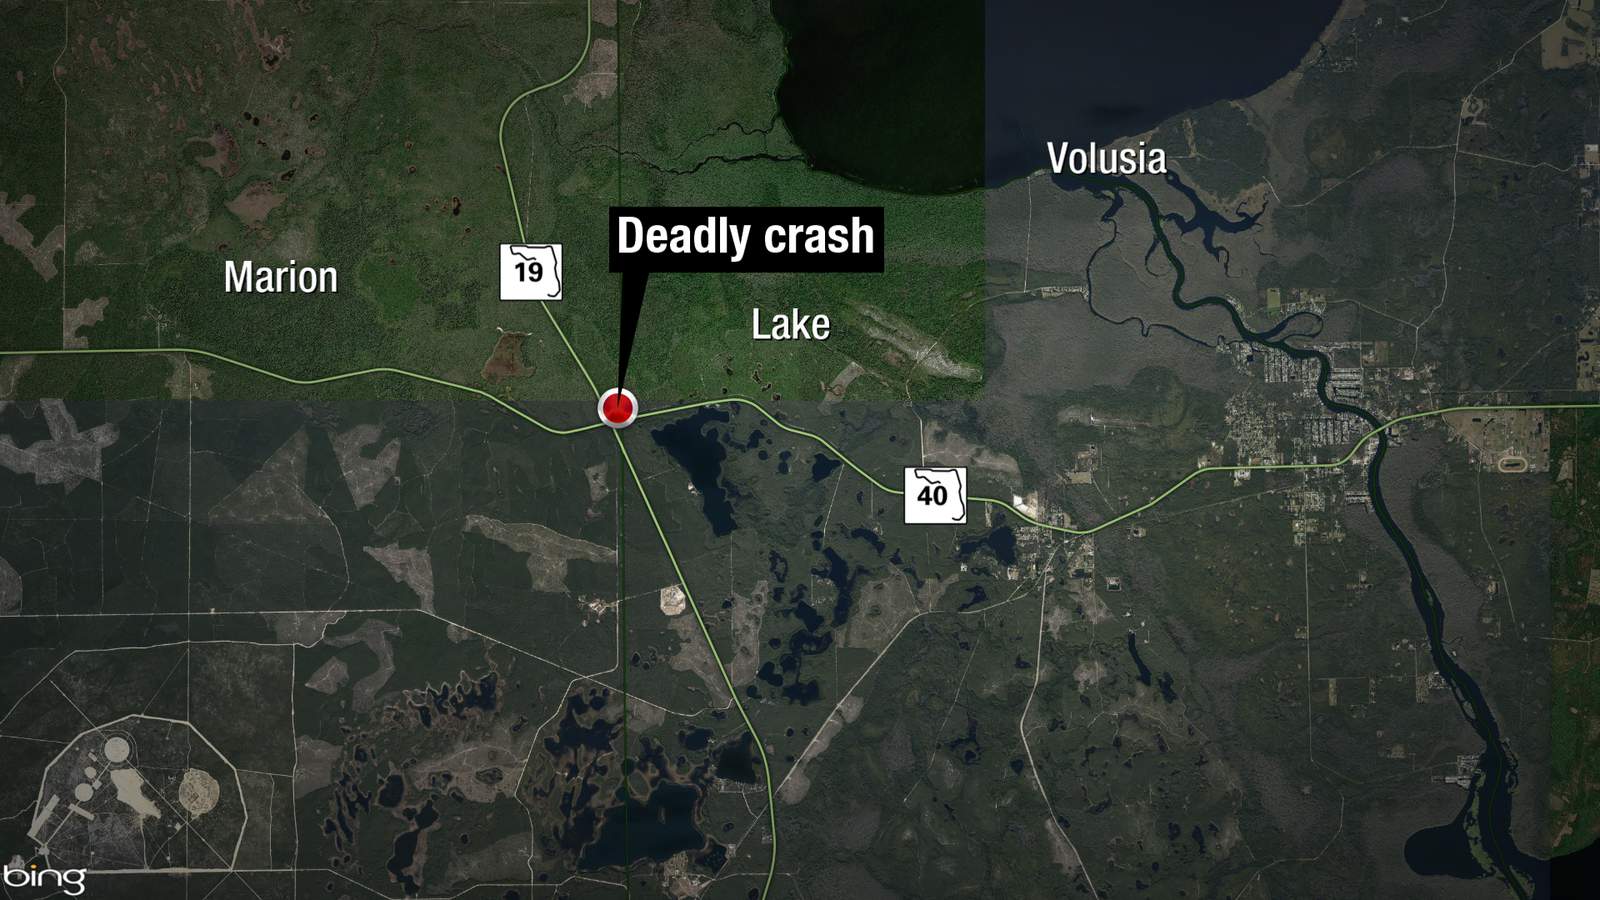 Motorcyclist, bear killed in collision on Marion County road